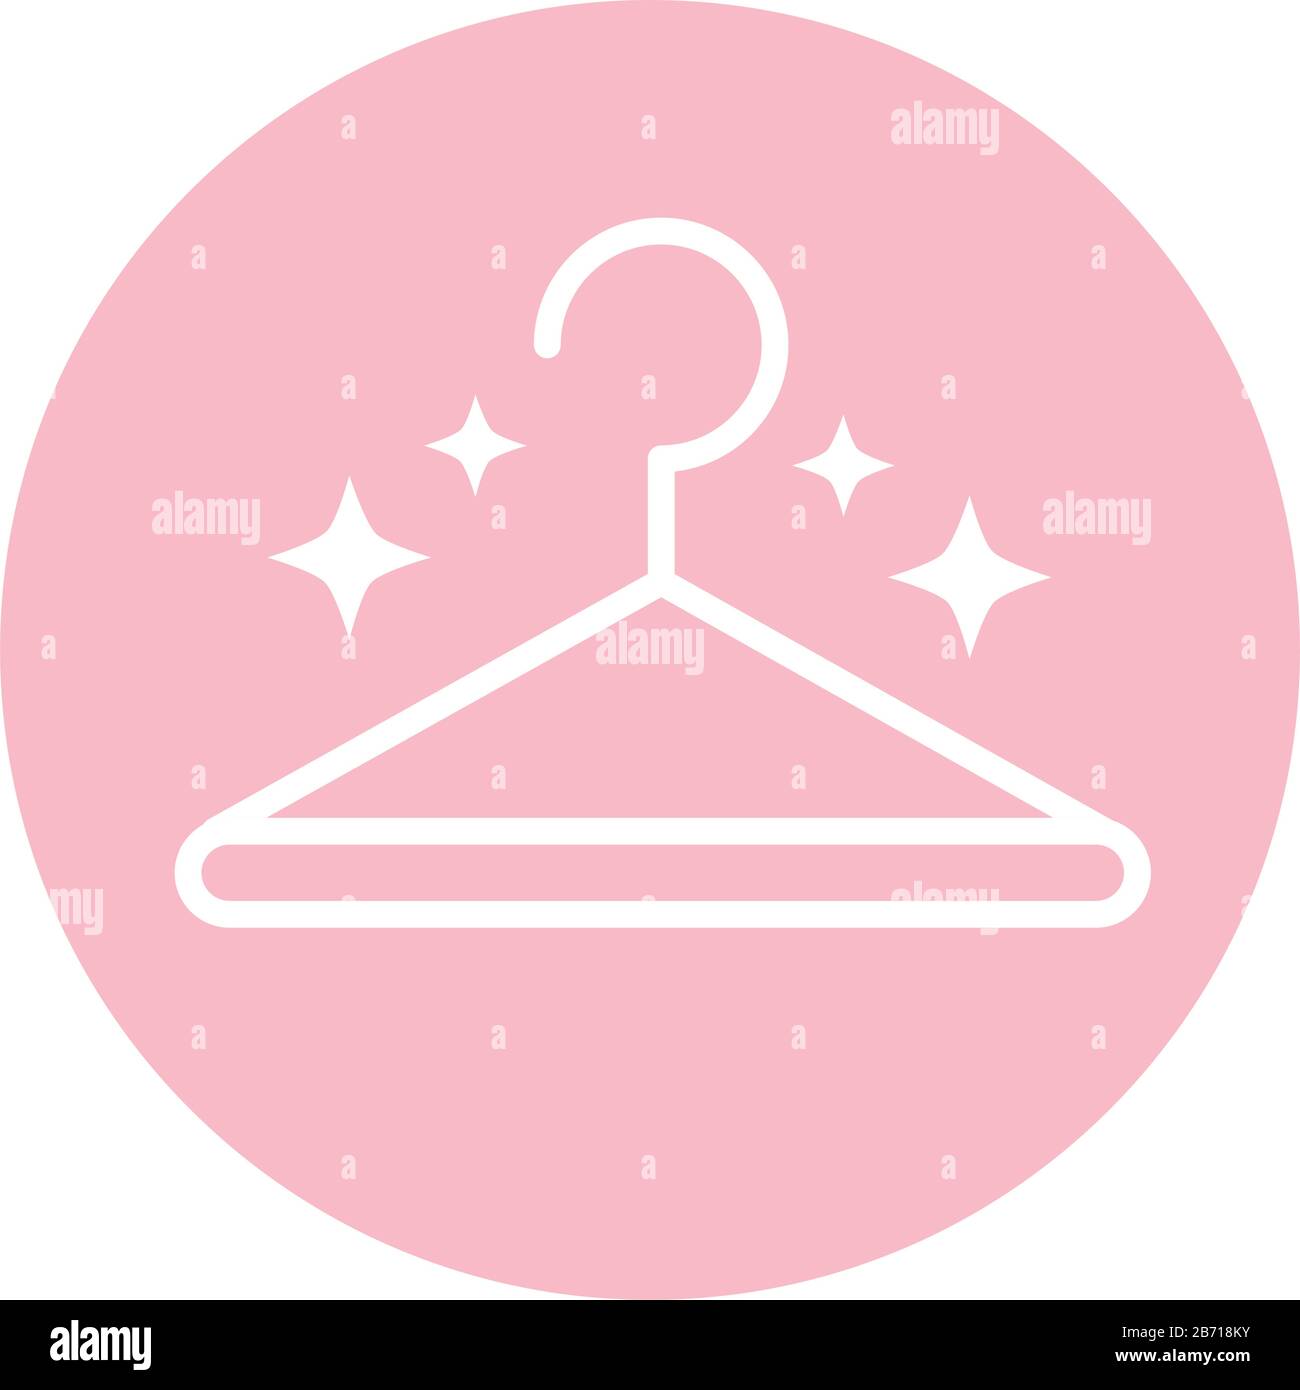 cleaning, clothes hanger laundry domestic hygiene vector illustration block color style icon Stock Vector